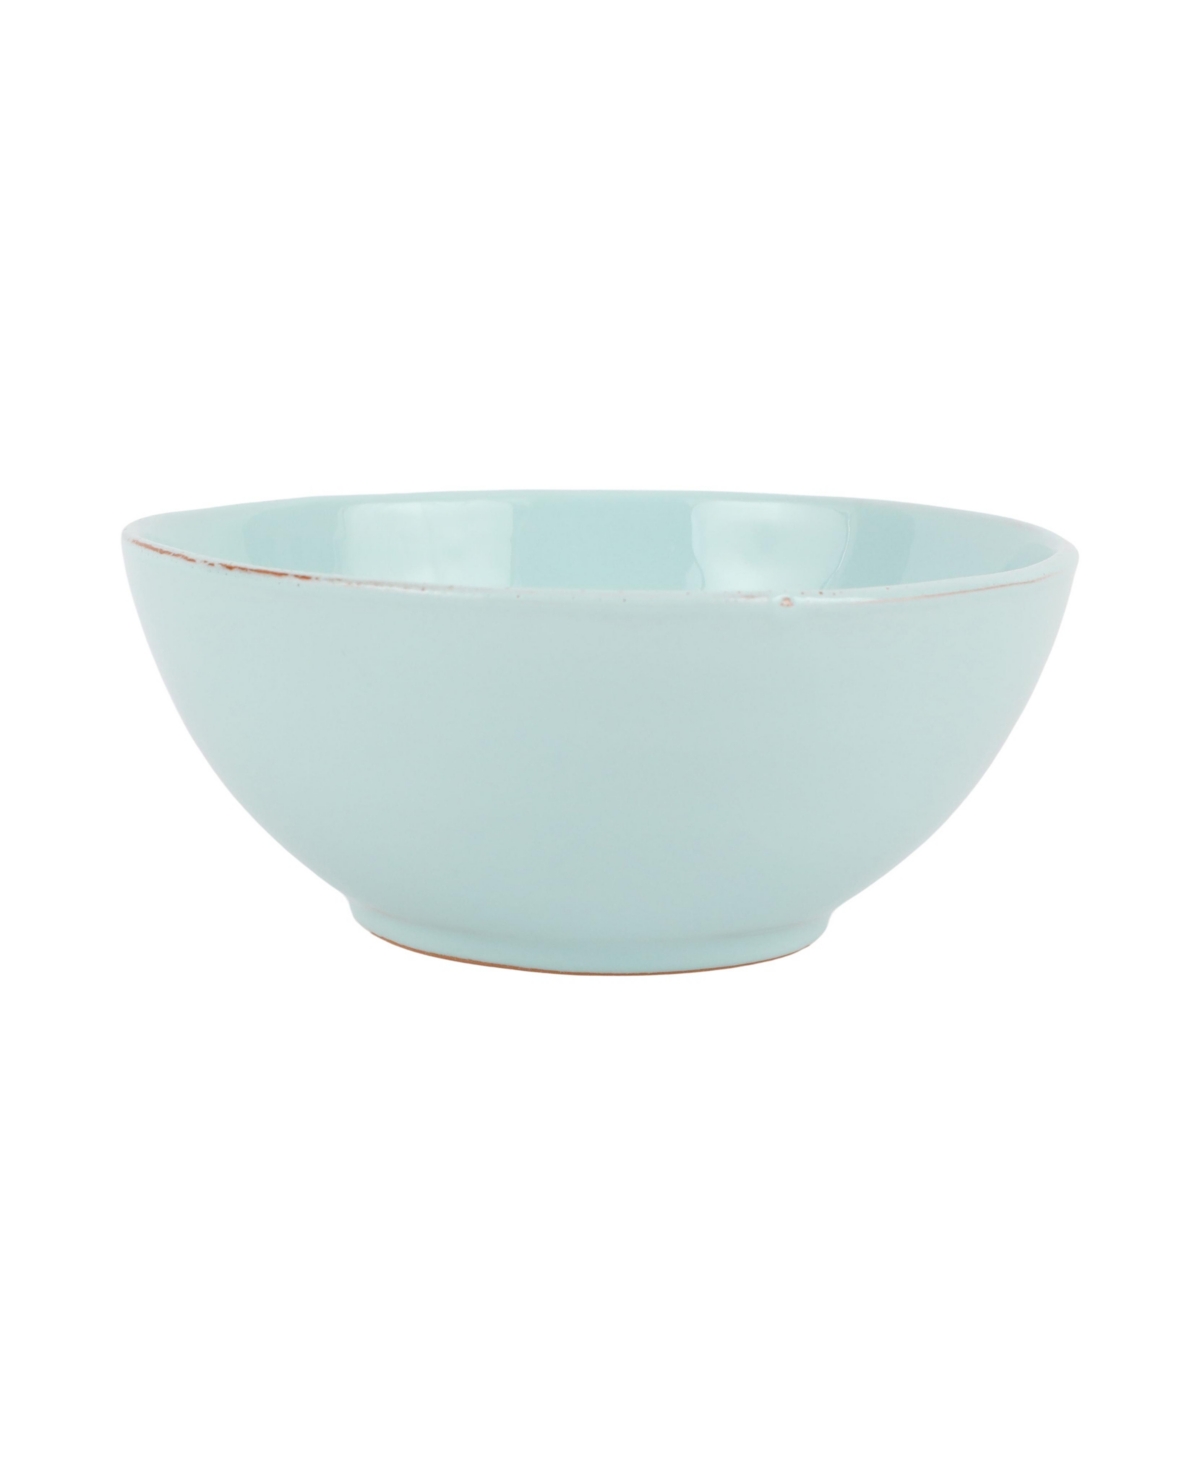 Vietri Cucina Fresca Small Serving Bowl In Turquoise